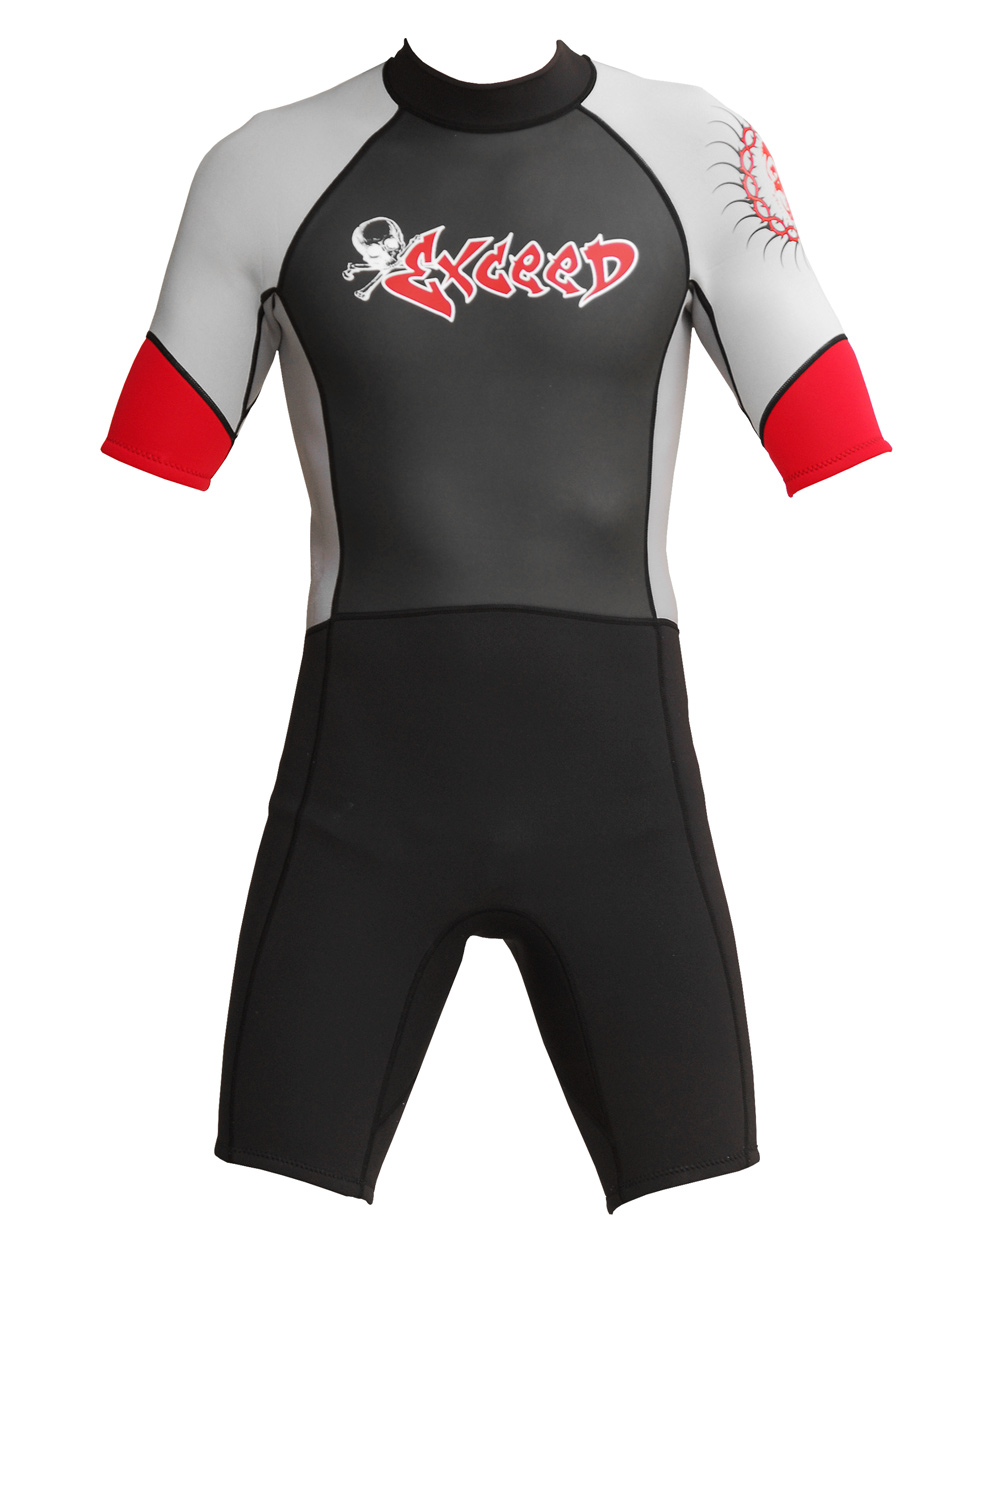 Exceed Epic Mens 3/2mm Shorty Wetsuit